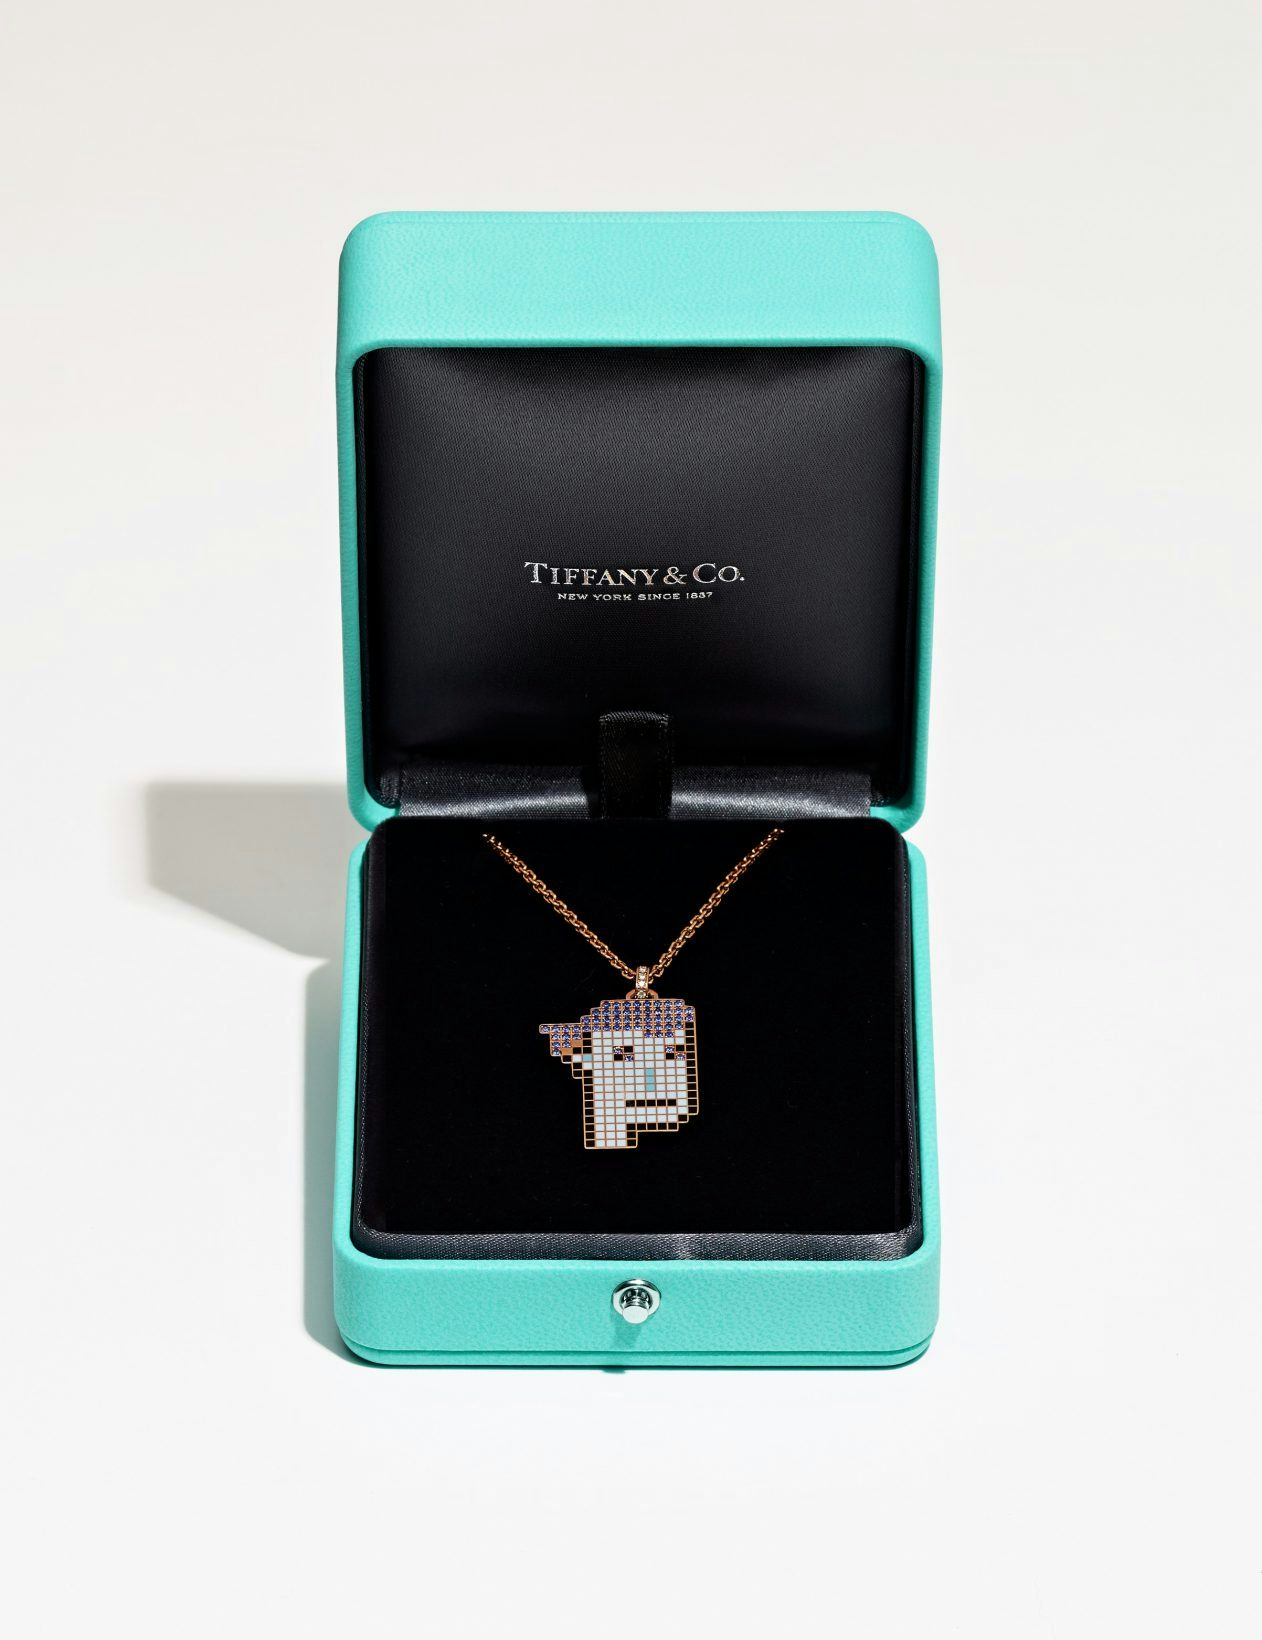 Tiffany launches its new “NFTiffs” pendants directly inspired by CryptoPunks